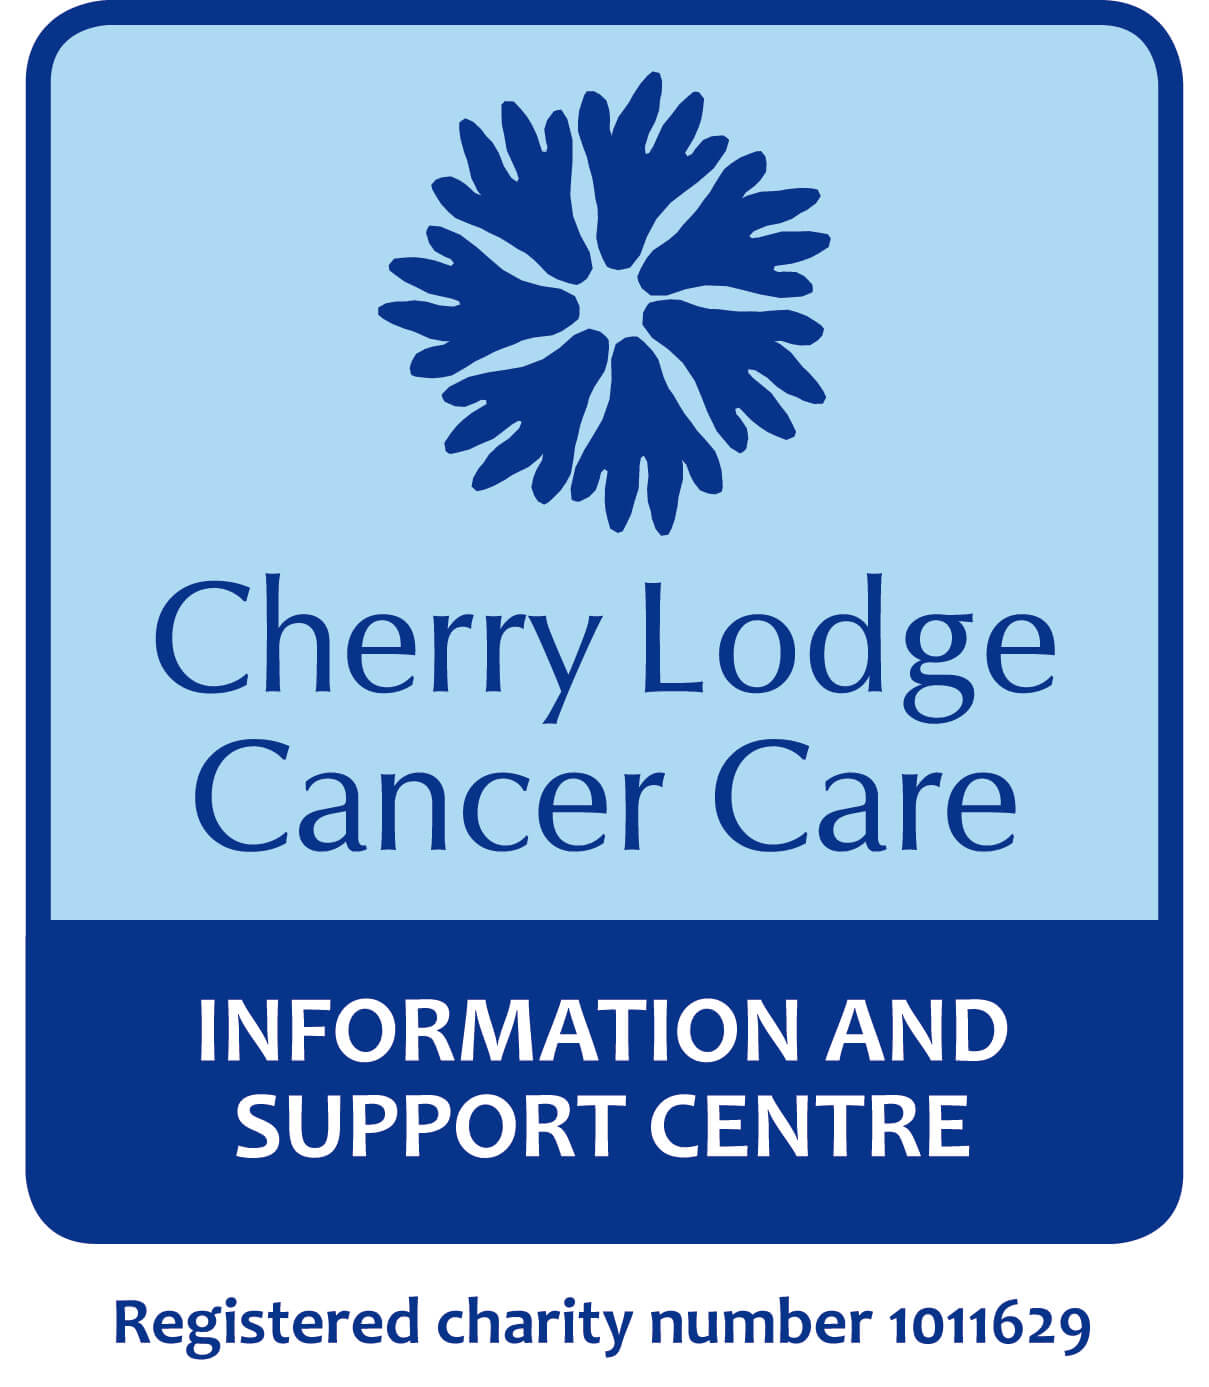 Cherry Lodge Cancer Care